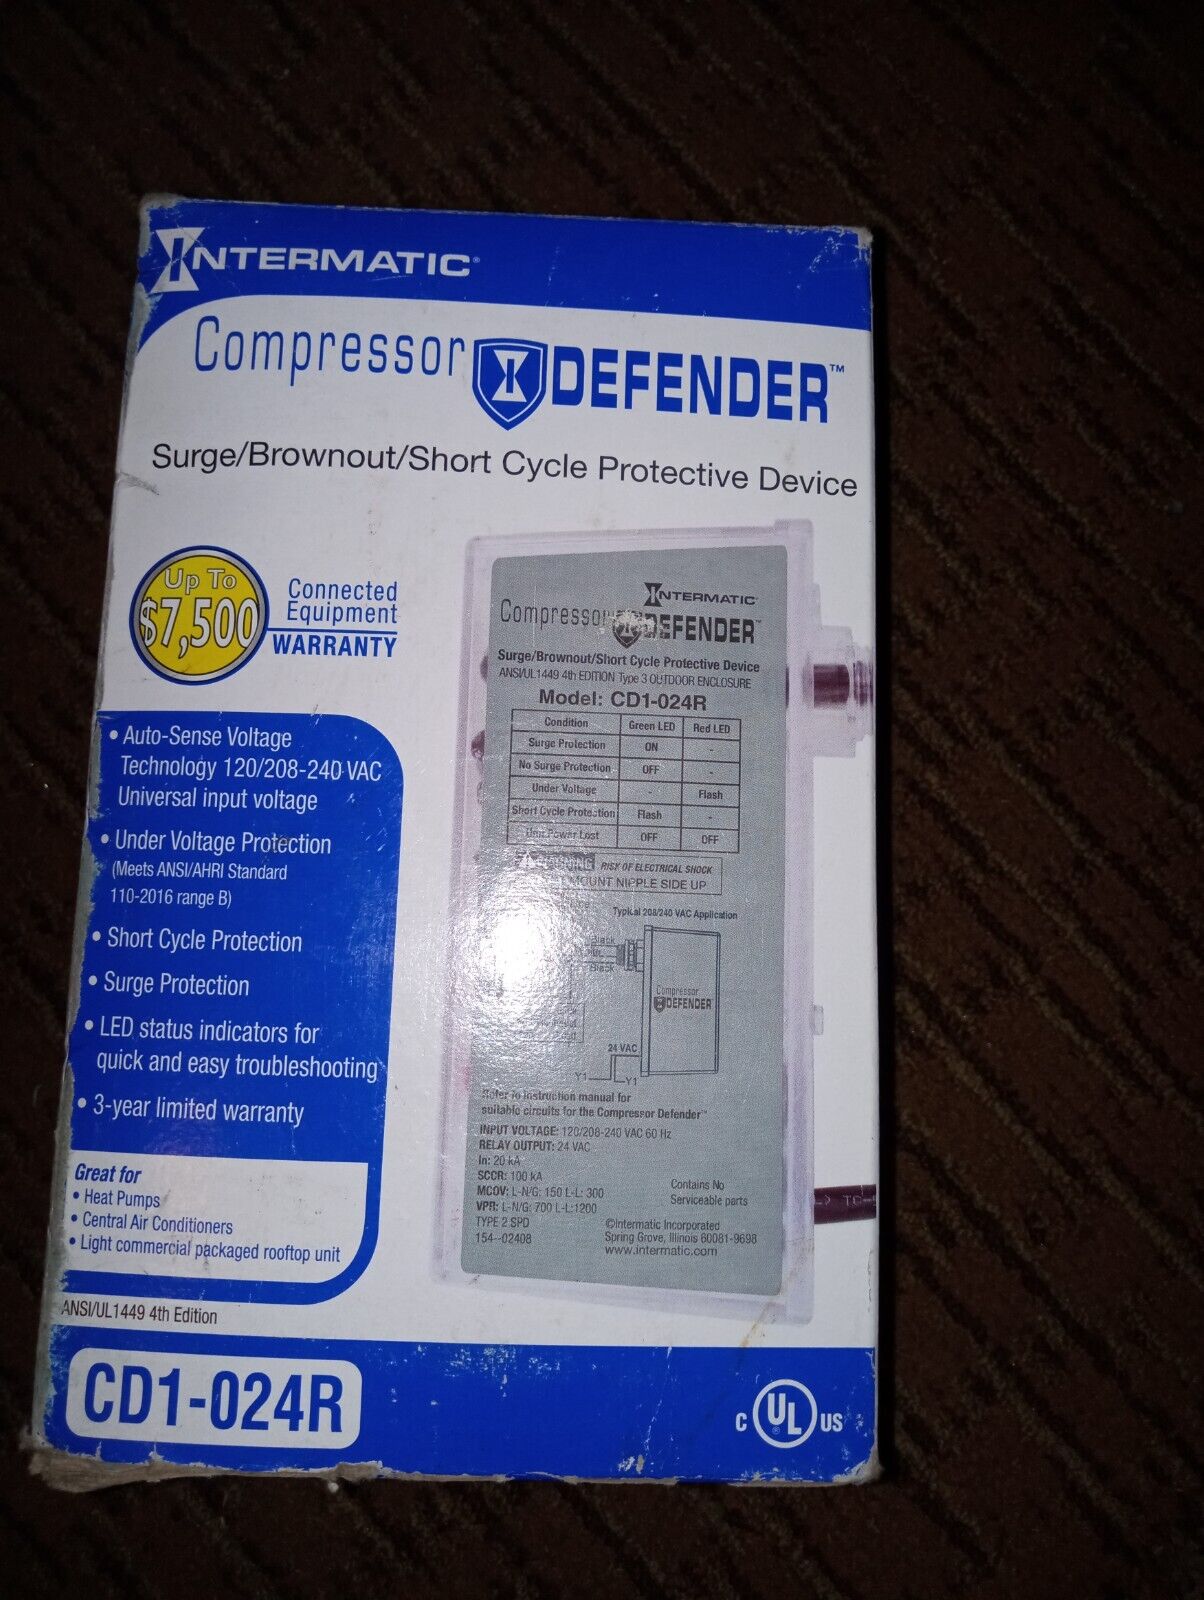 intermatic CD1-024R surge/brownout/short cycle protection device